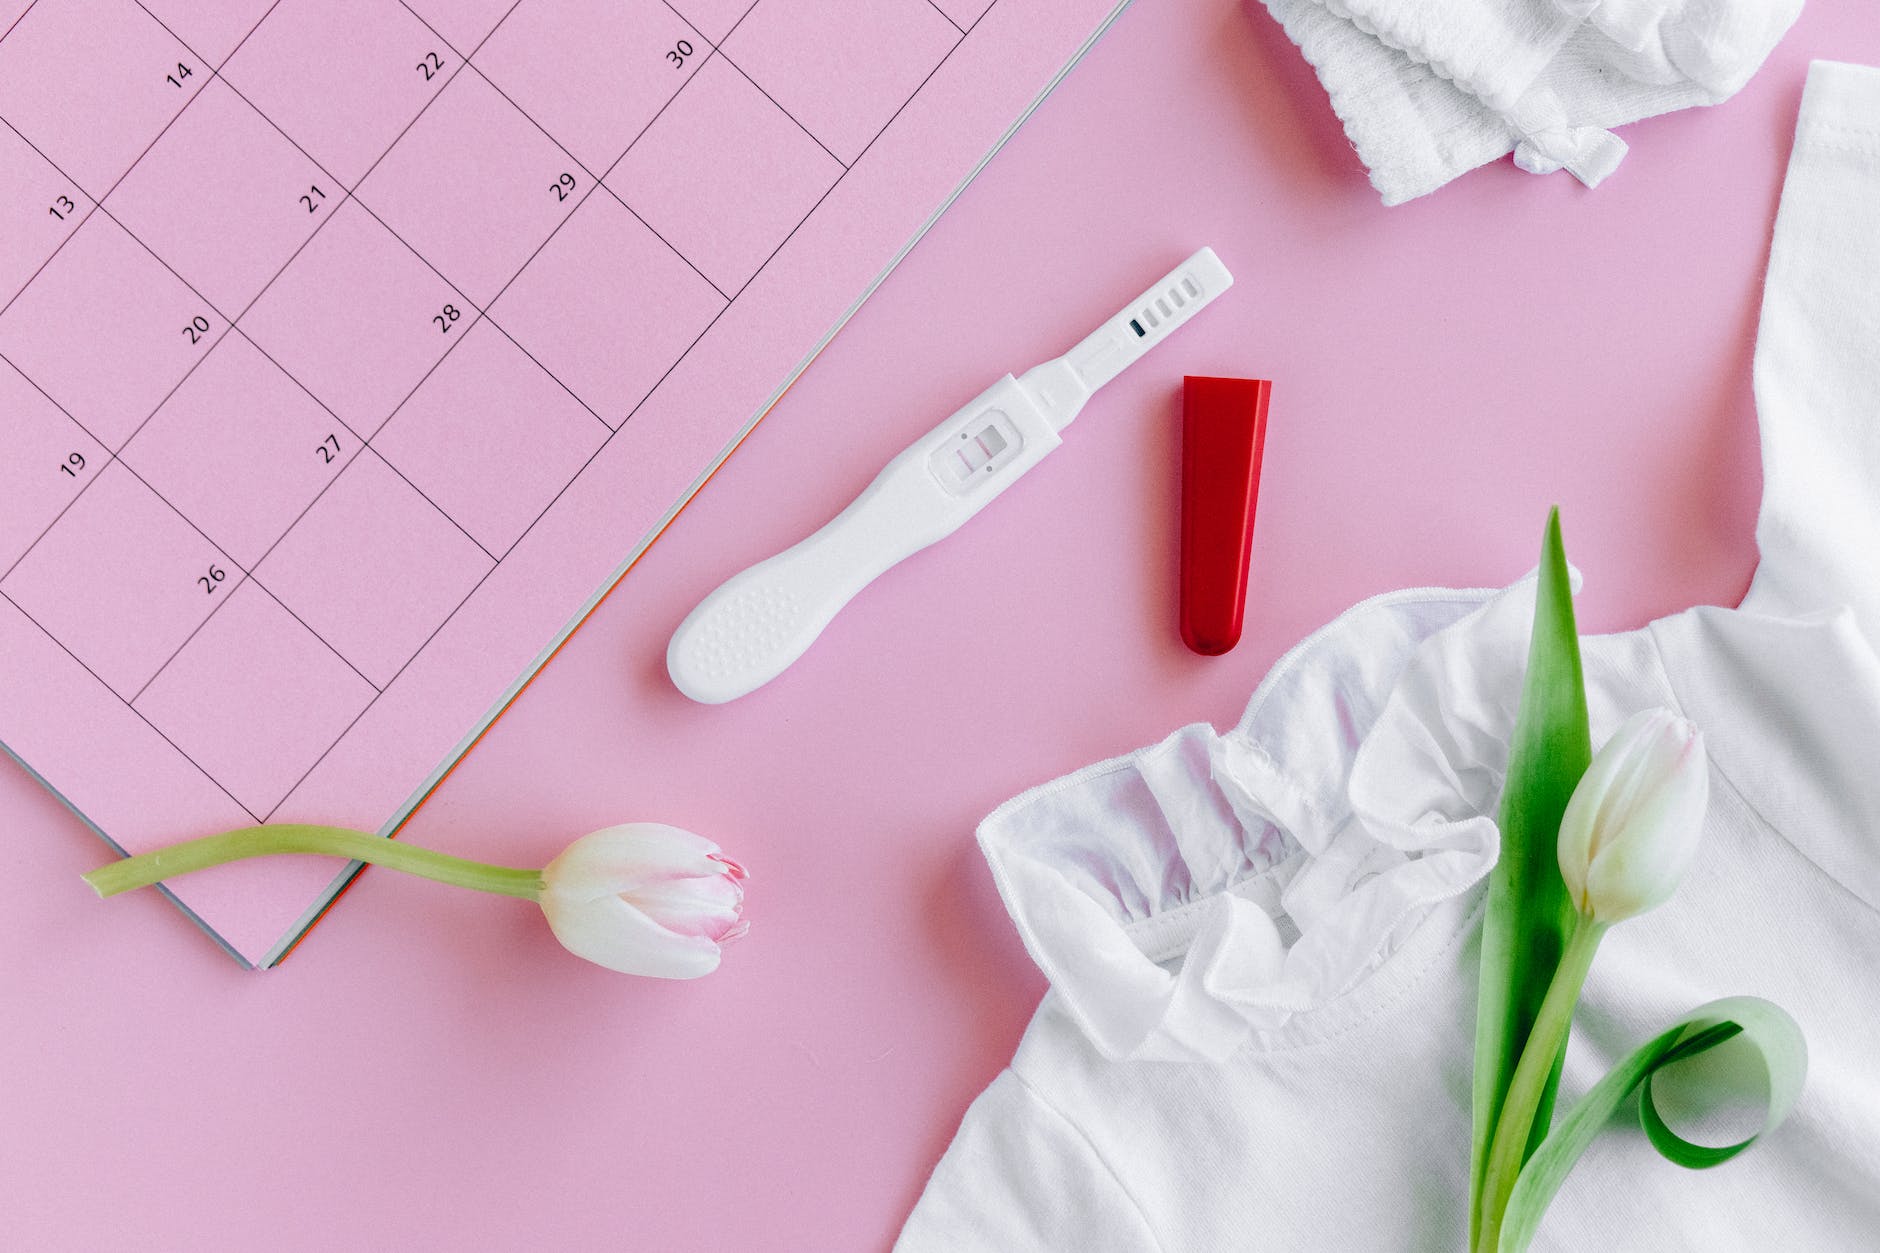 What Qualities To Look For In a Fertility Specialist